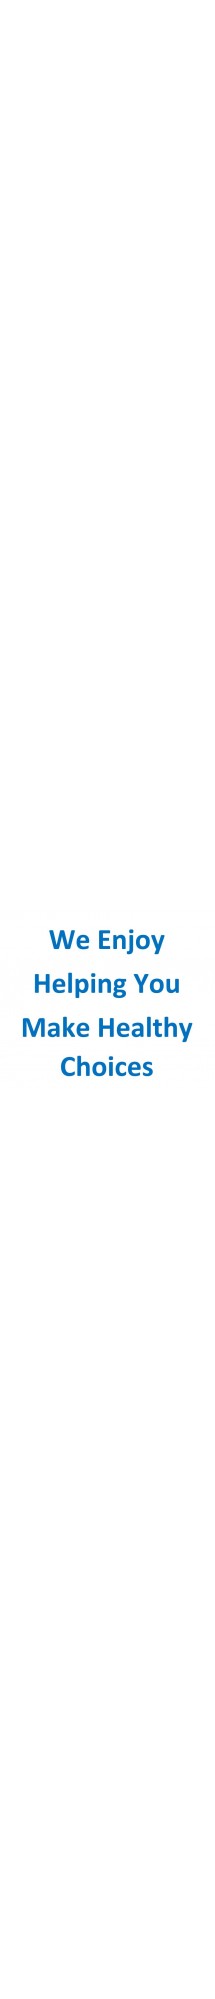 We Enjoy Helping You Make Healthy Choices